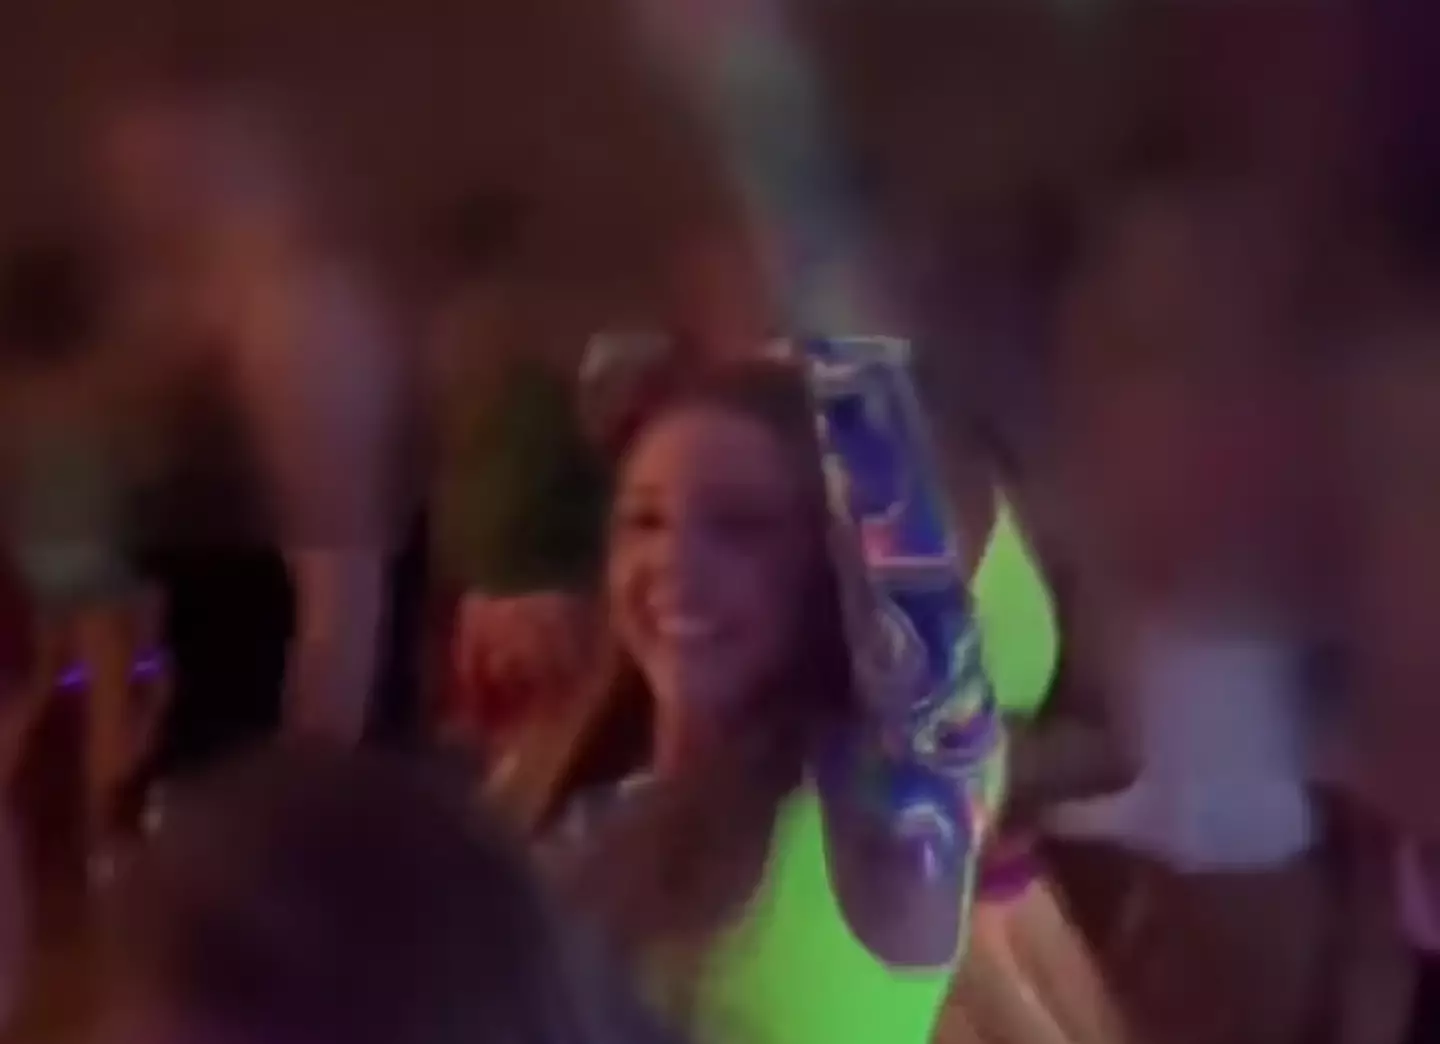 The Lousiana teen was filmed dancing at a private Homecoming party.